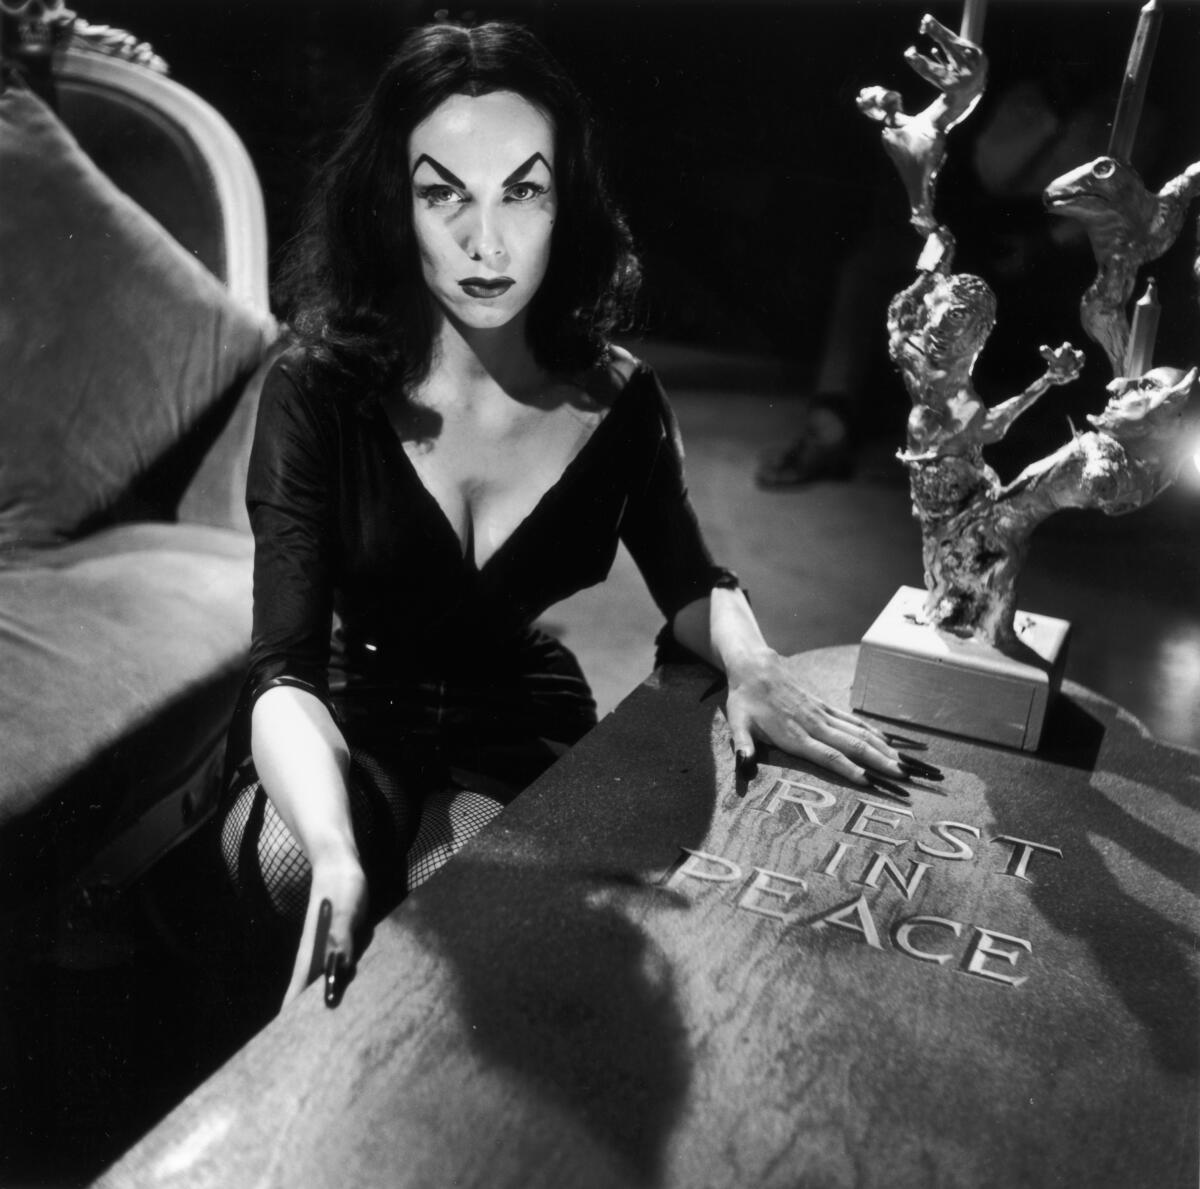 A publicity photo of actress and TV host Vampira, real name Maila Nurmi, crouching beside a wooden coffin, circa 1956.